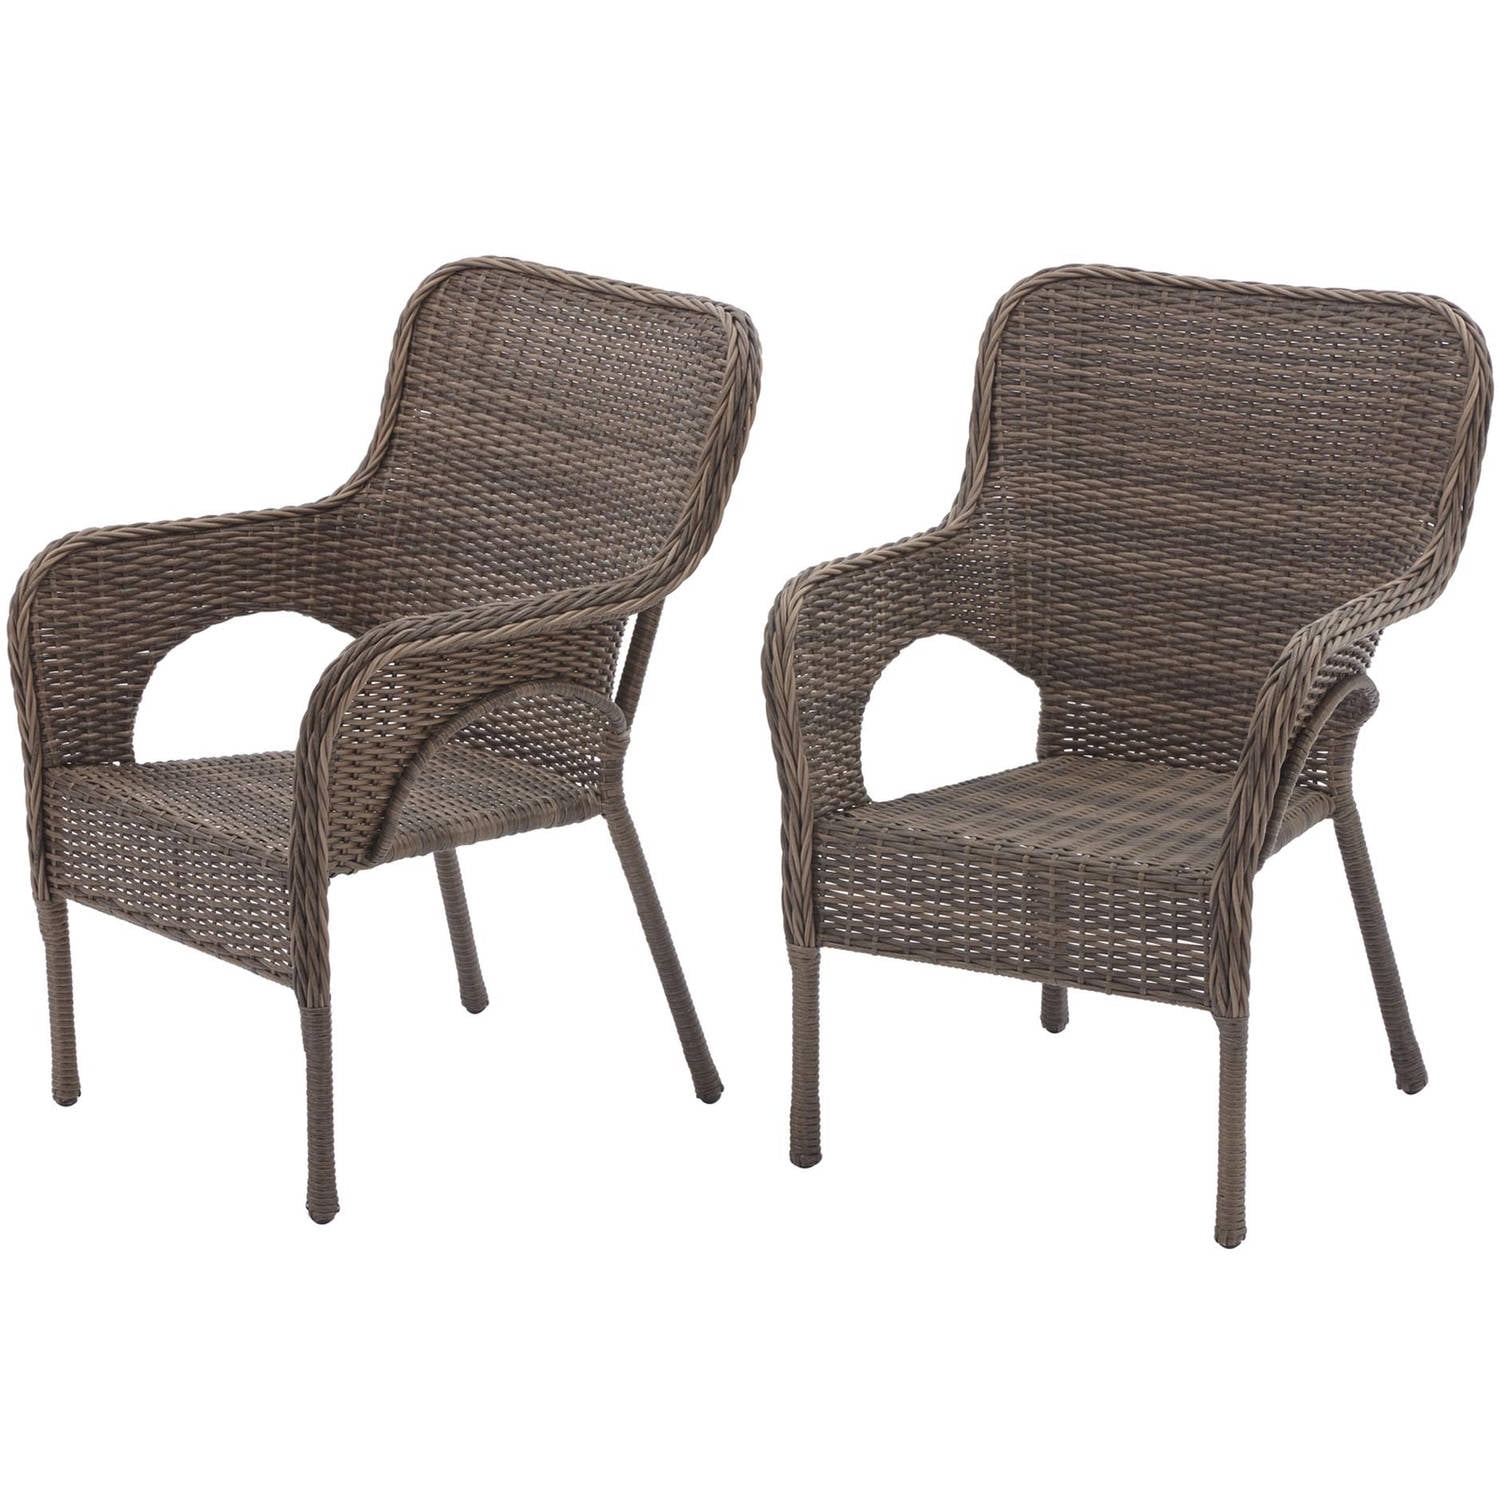 image: Better Homes and Gardens Camrose Farmhouse Mix and Match Stacking Wicker Chairs, Set of 2